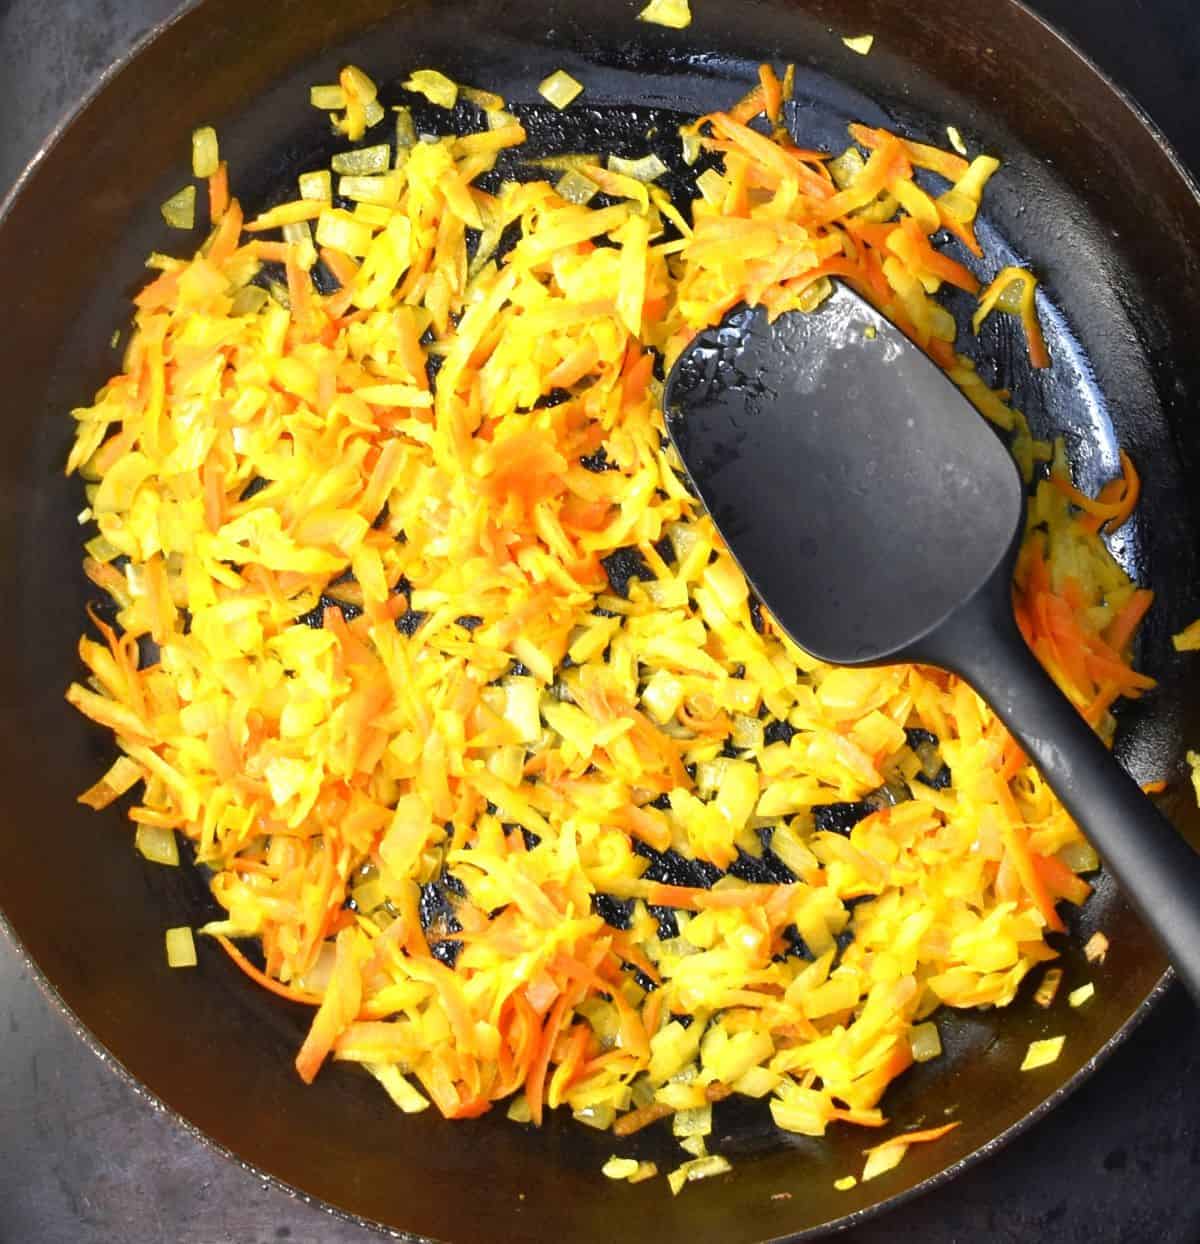 Cooking shredded carrot and onion in pan with black spatula.